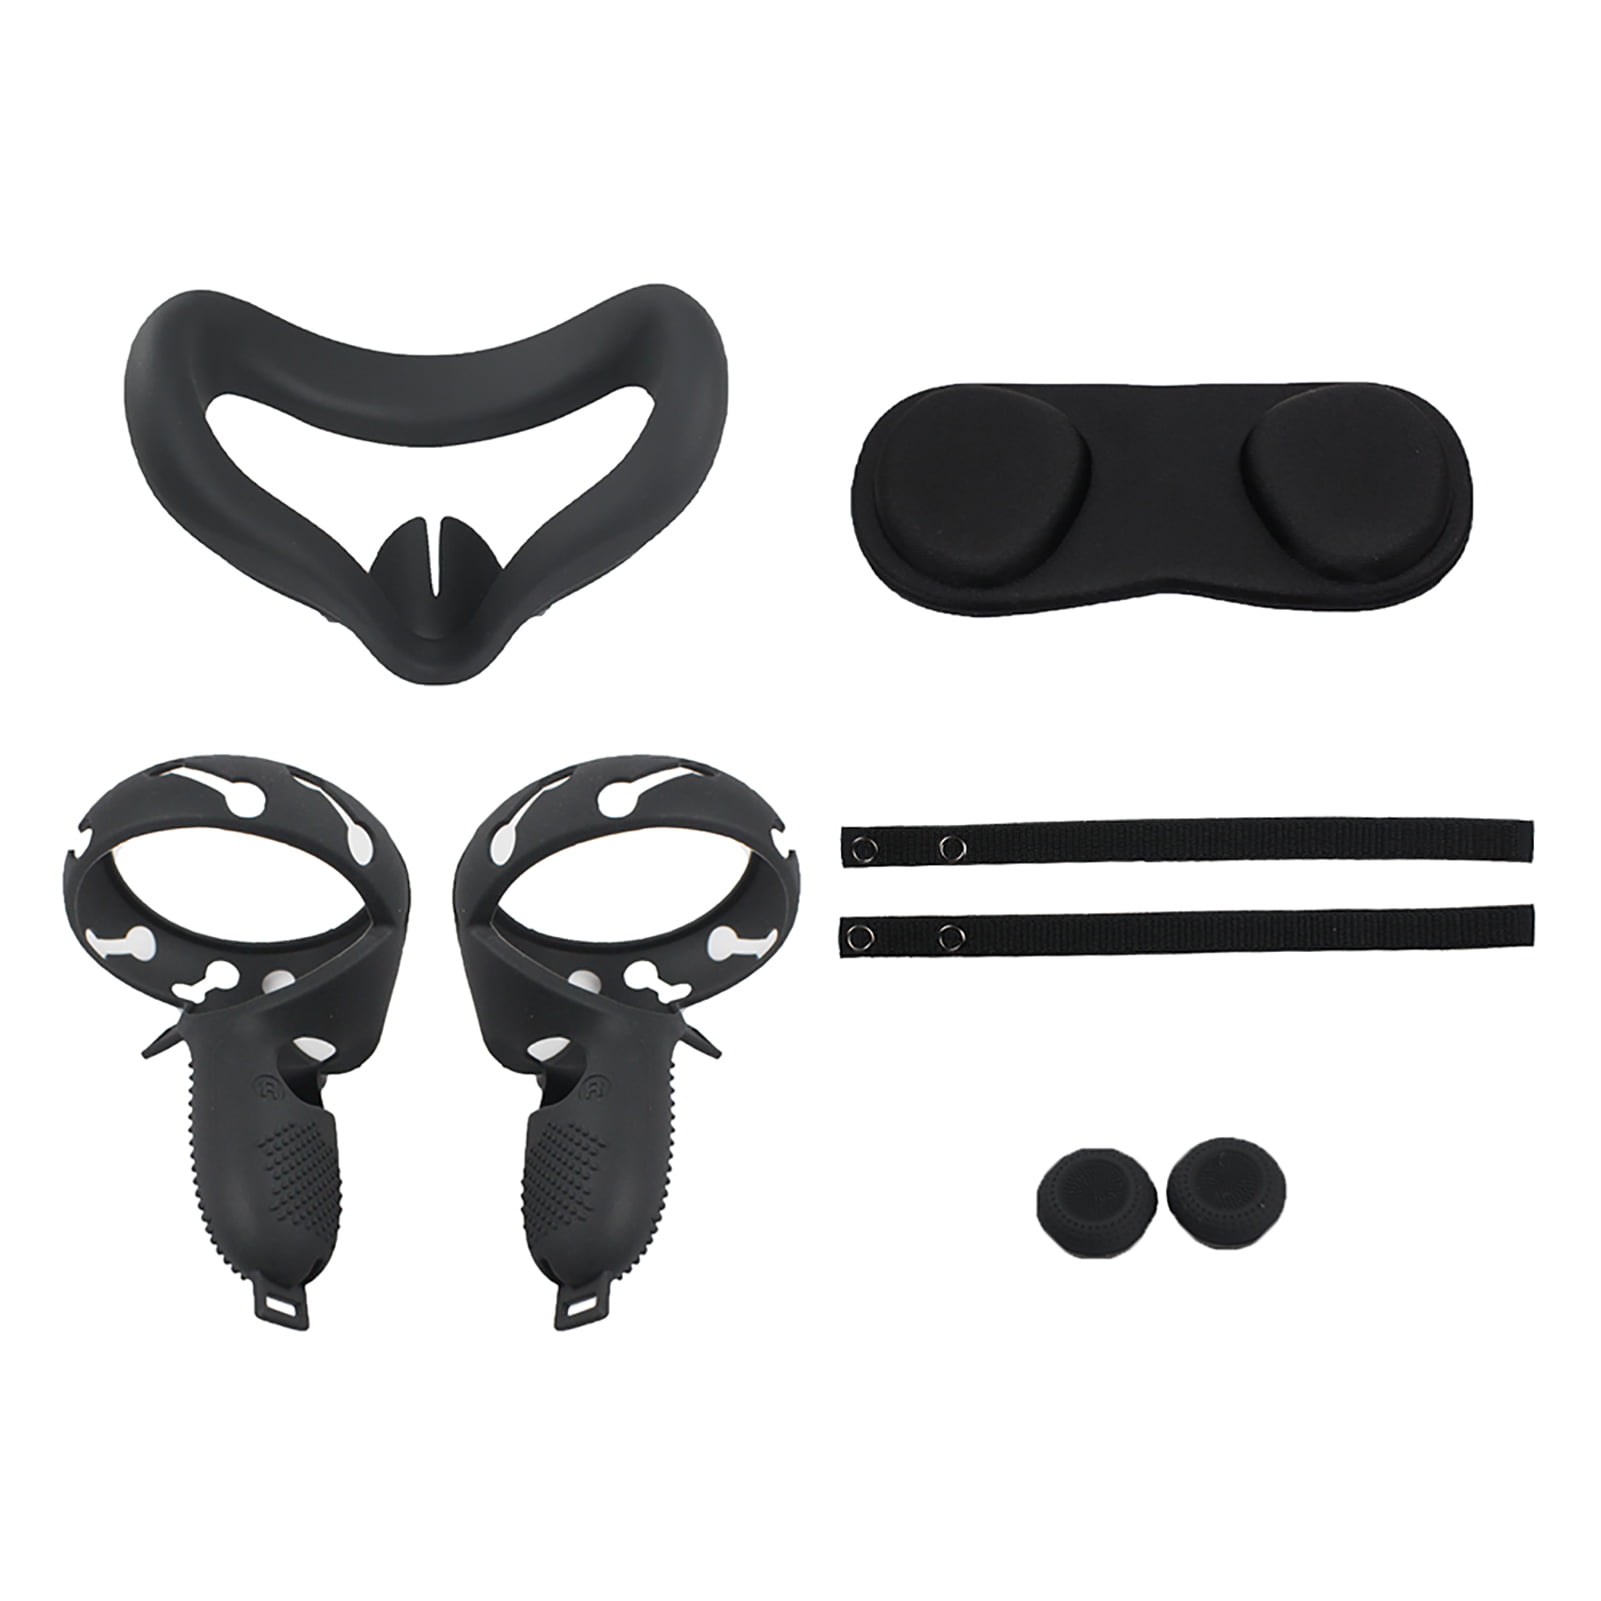 Black BWWNBY Protective Gaming Controller Grip Cover Facial Cushion Set for Oculus Quest 2